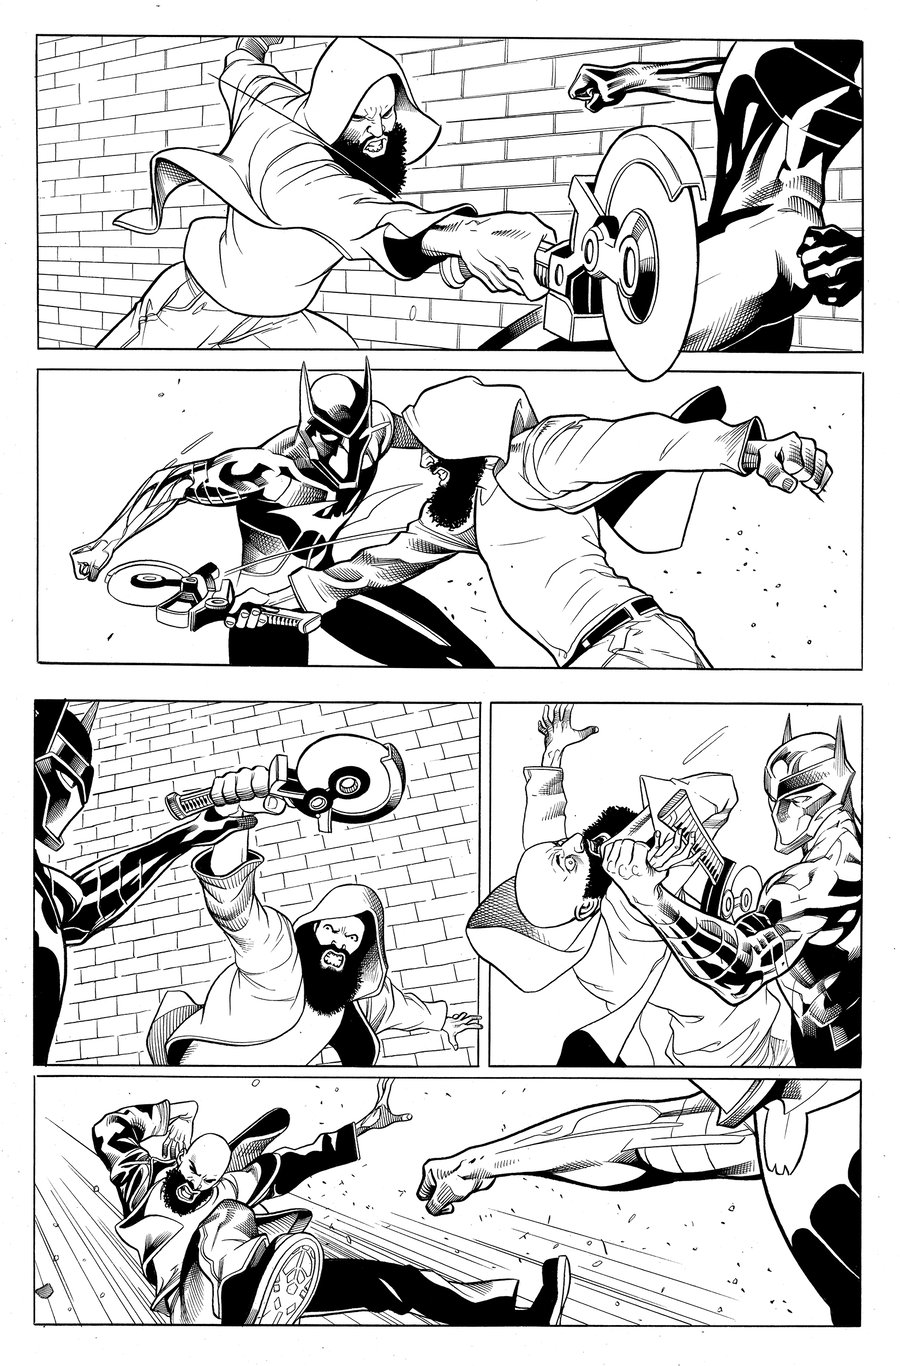 Image of The Next Batman: Second Son (2021) Chapter 3 PG 3